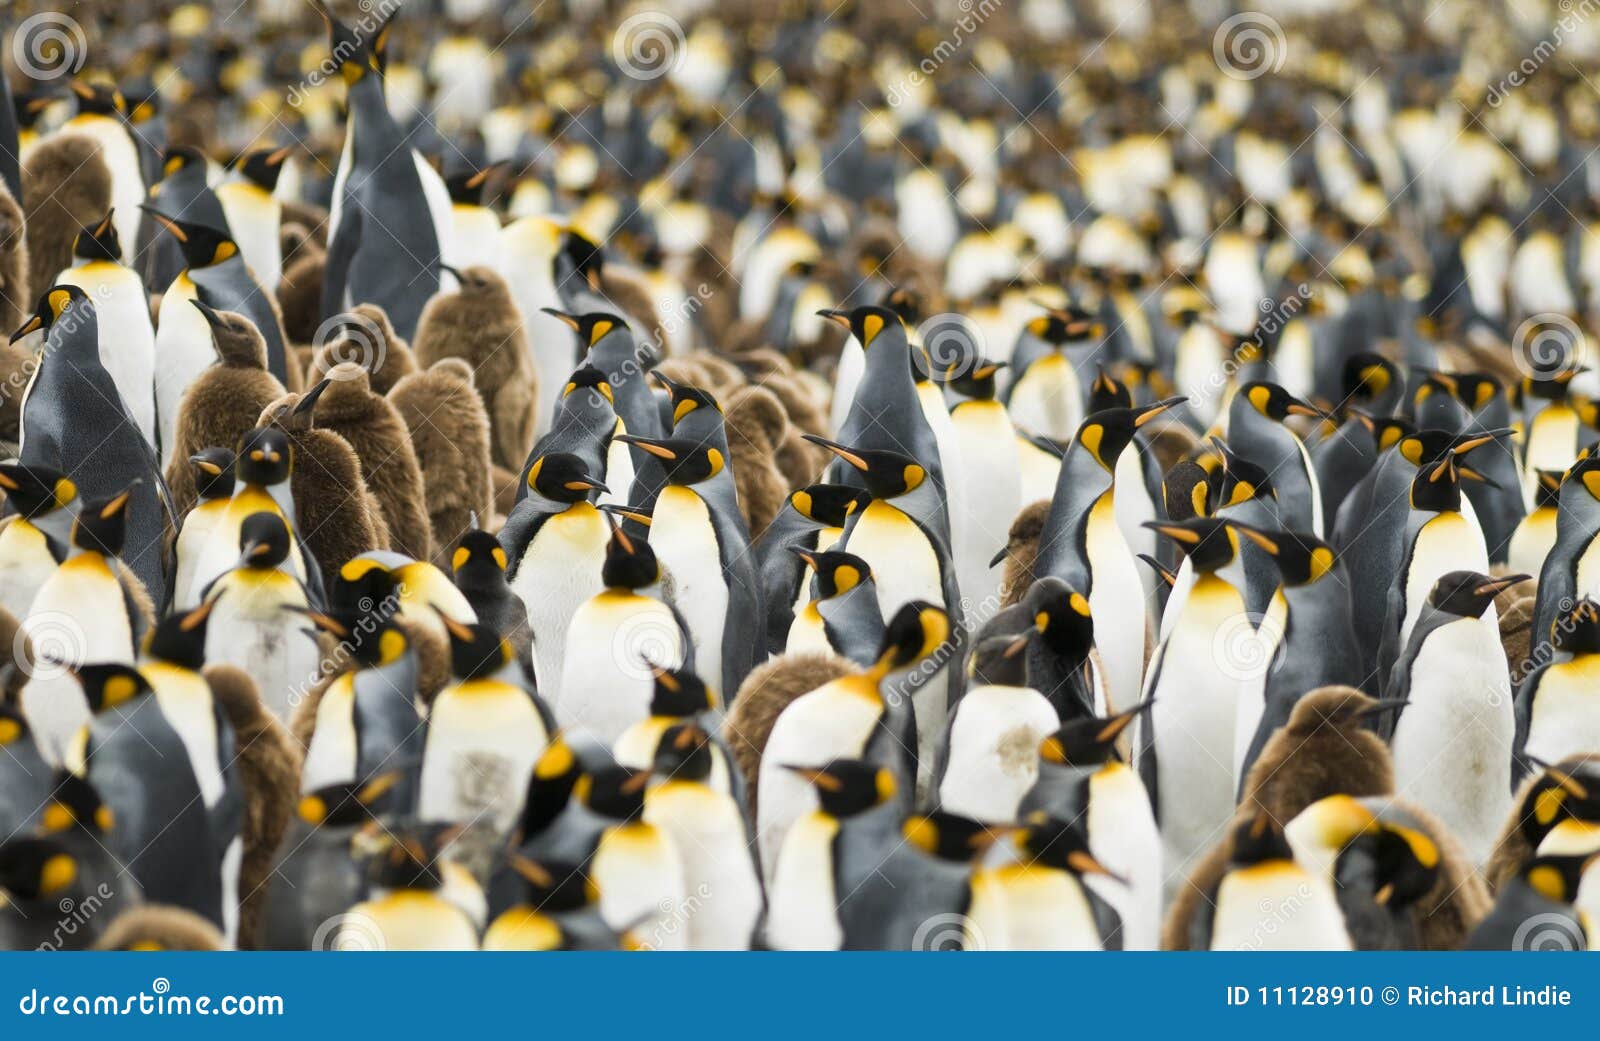 crowded king penguin colony